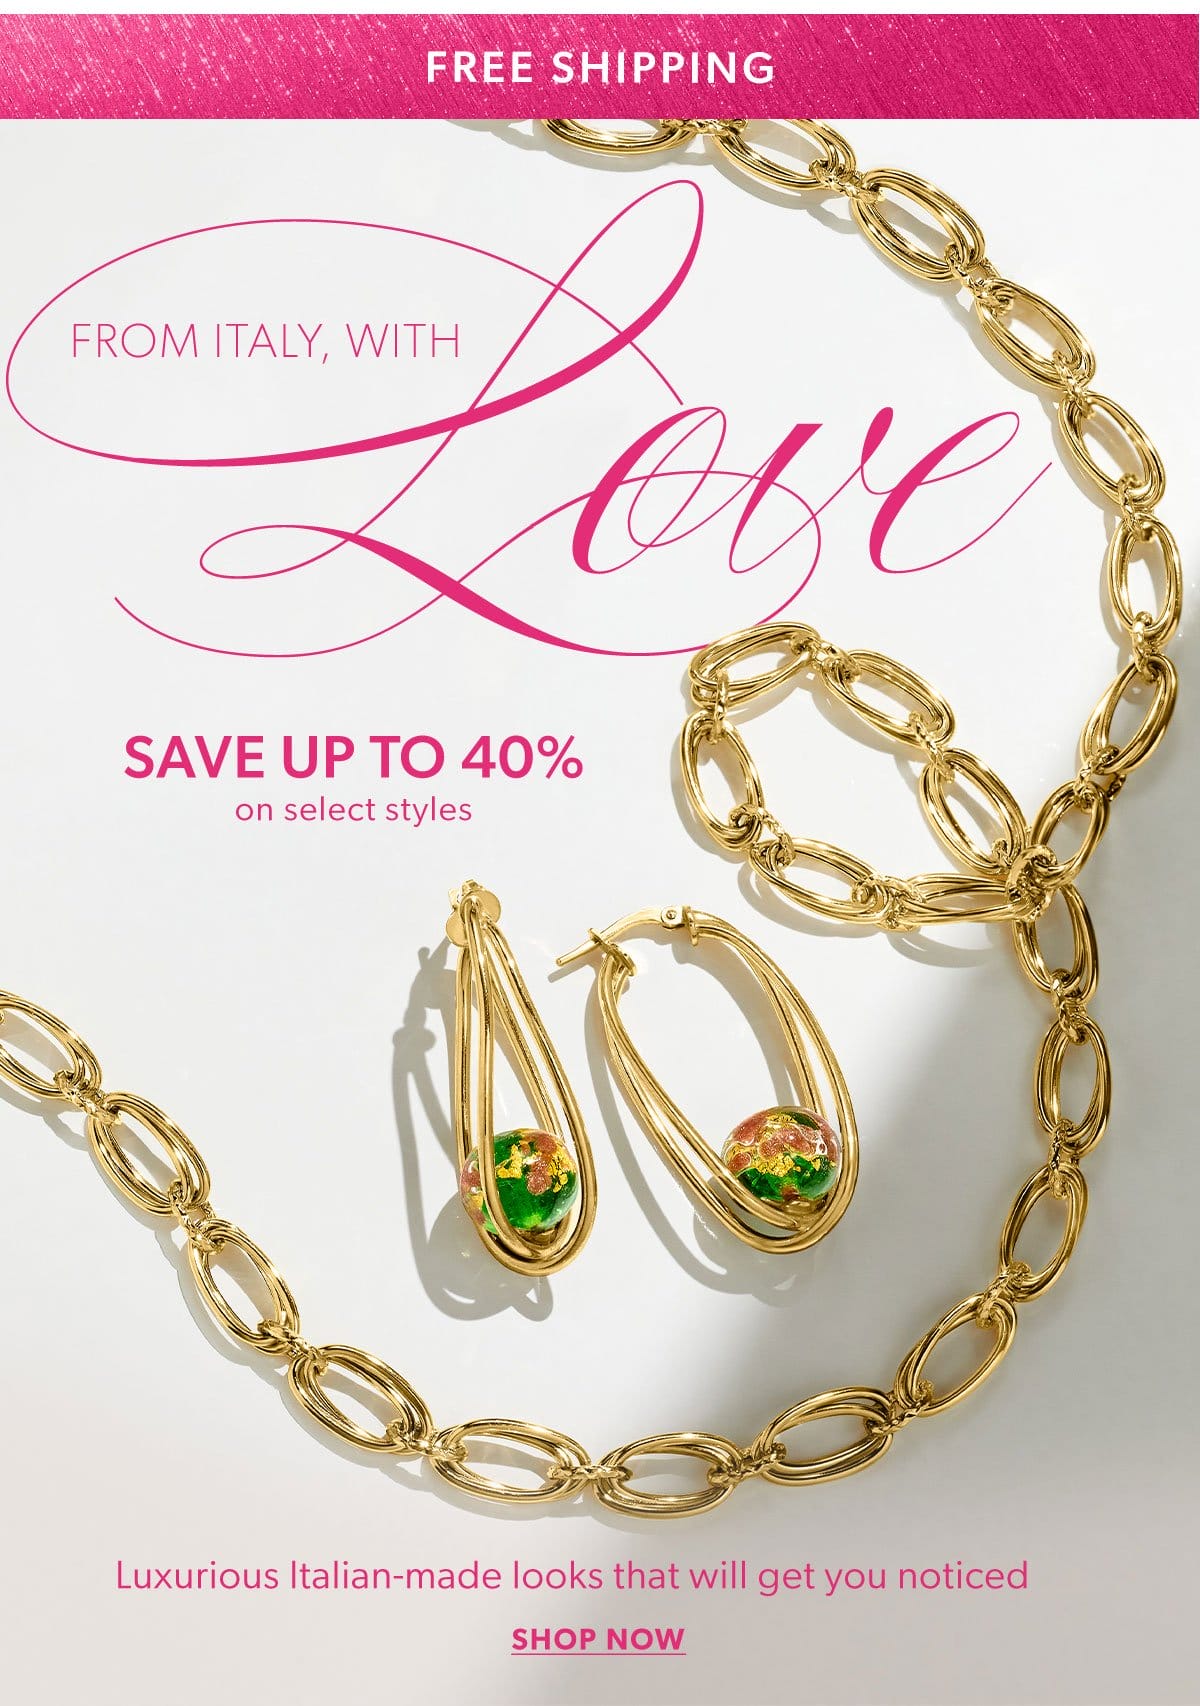 From Italy, With Love. Save Up To 40% on Select Styles